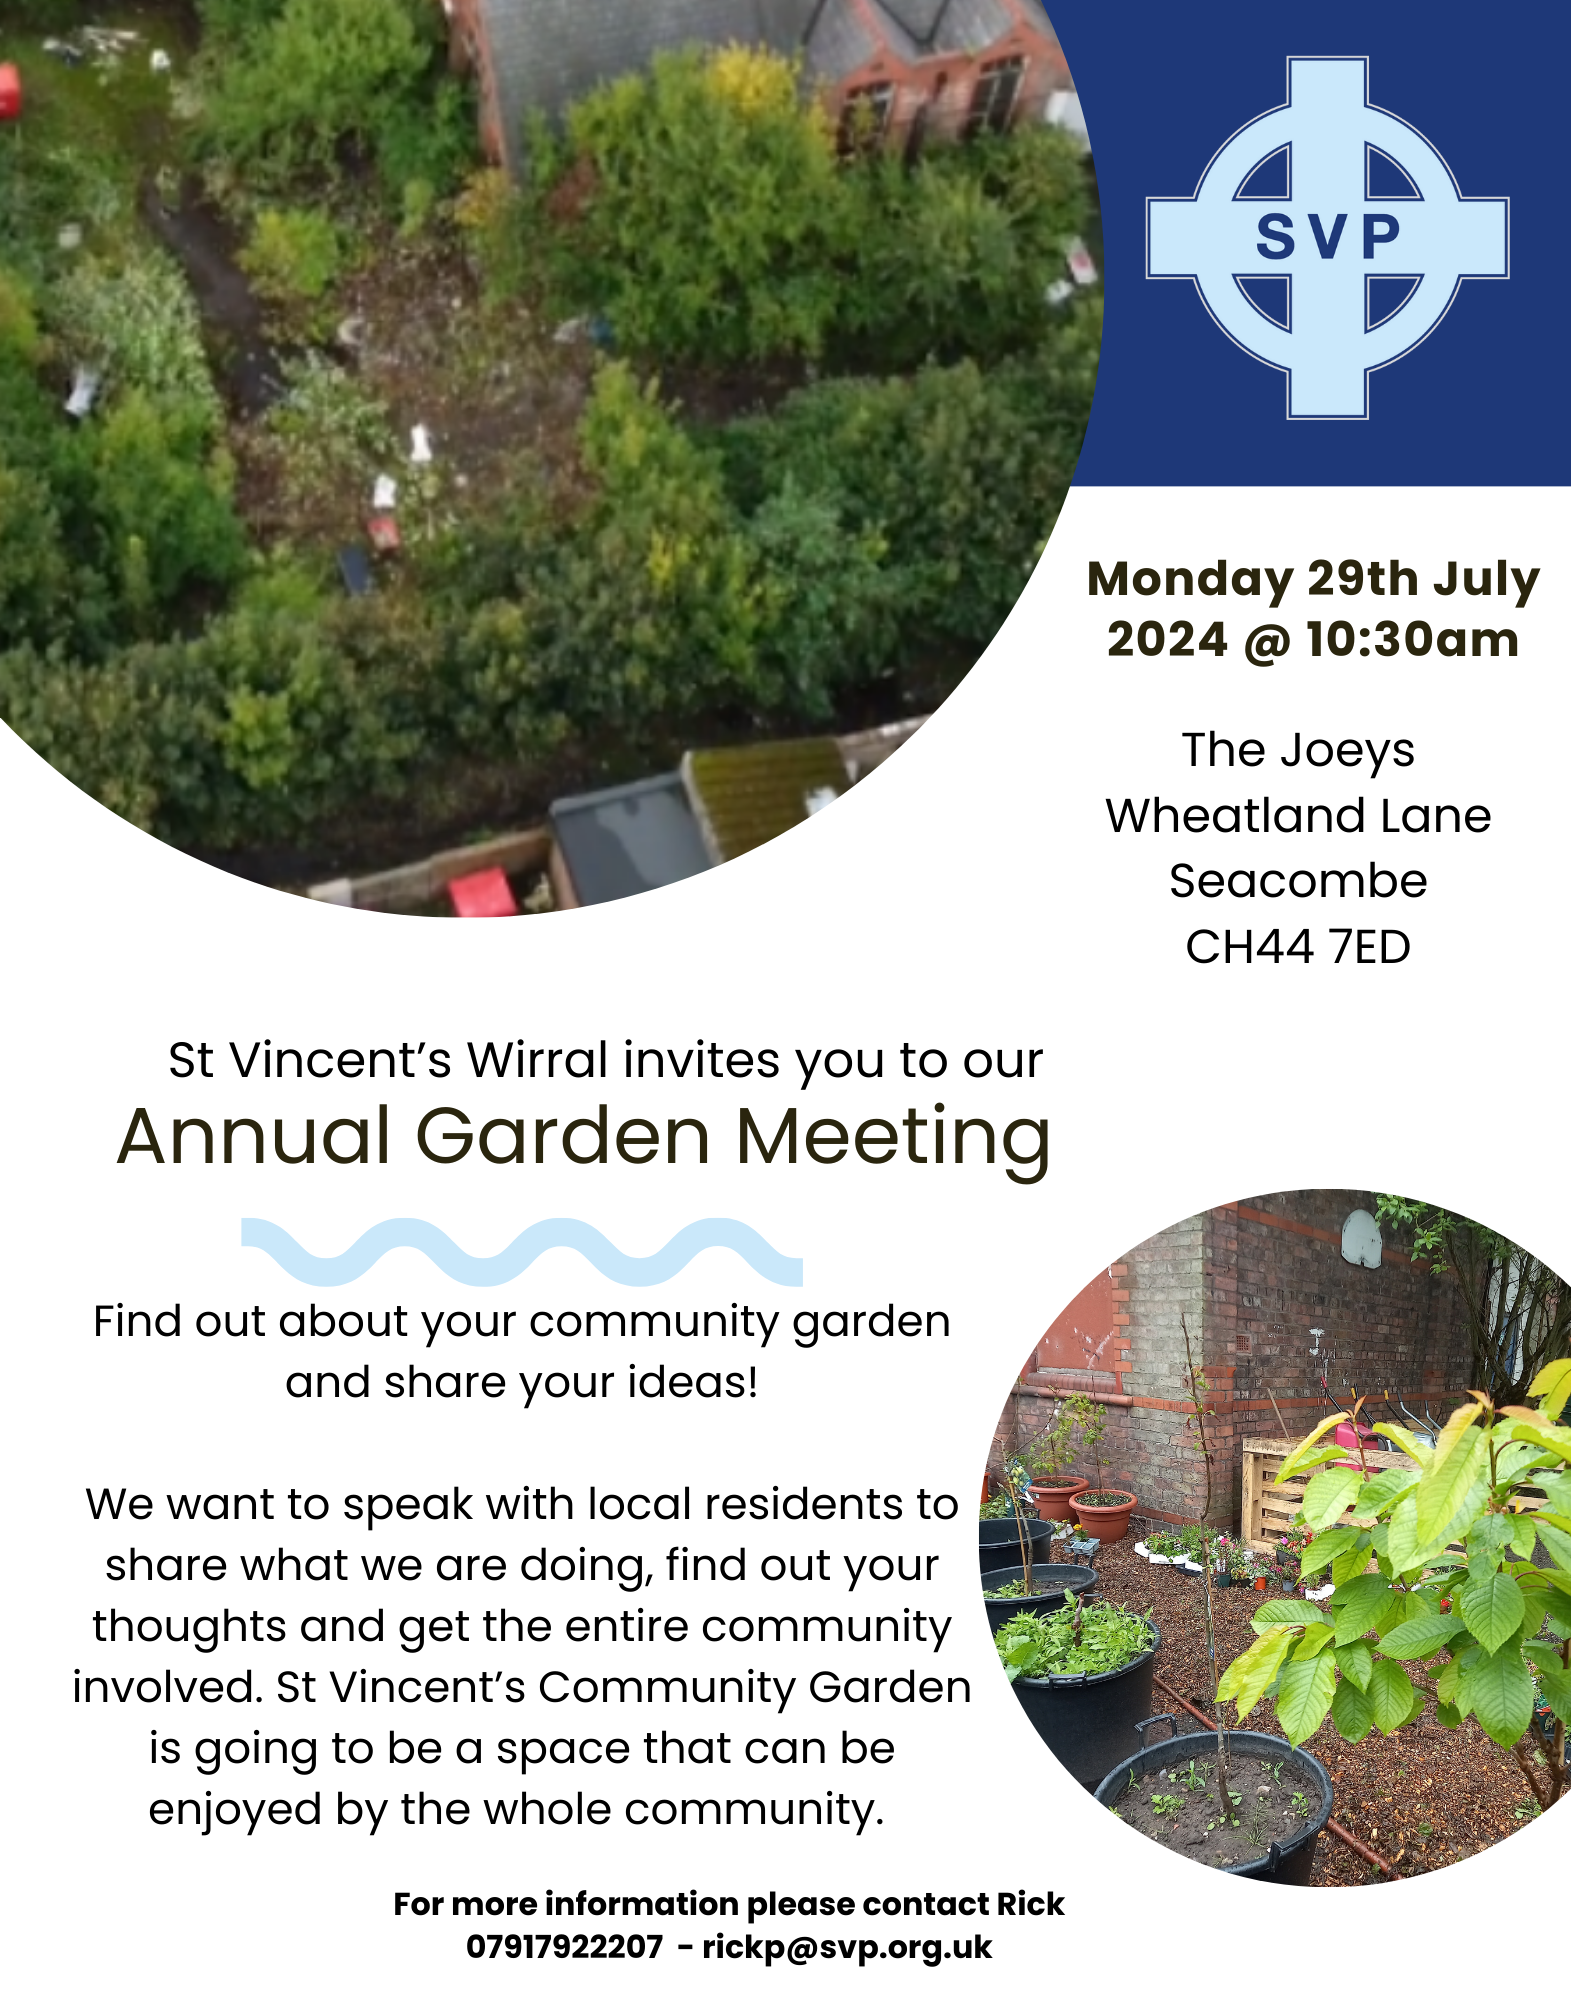 Invitation to Community Garden Meeting on 29th July at 10.30am at The Joeys